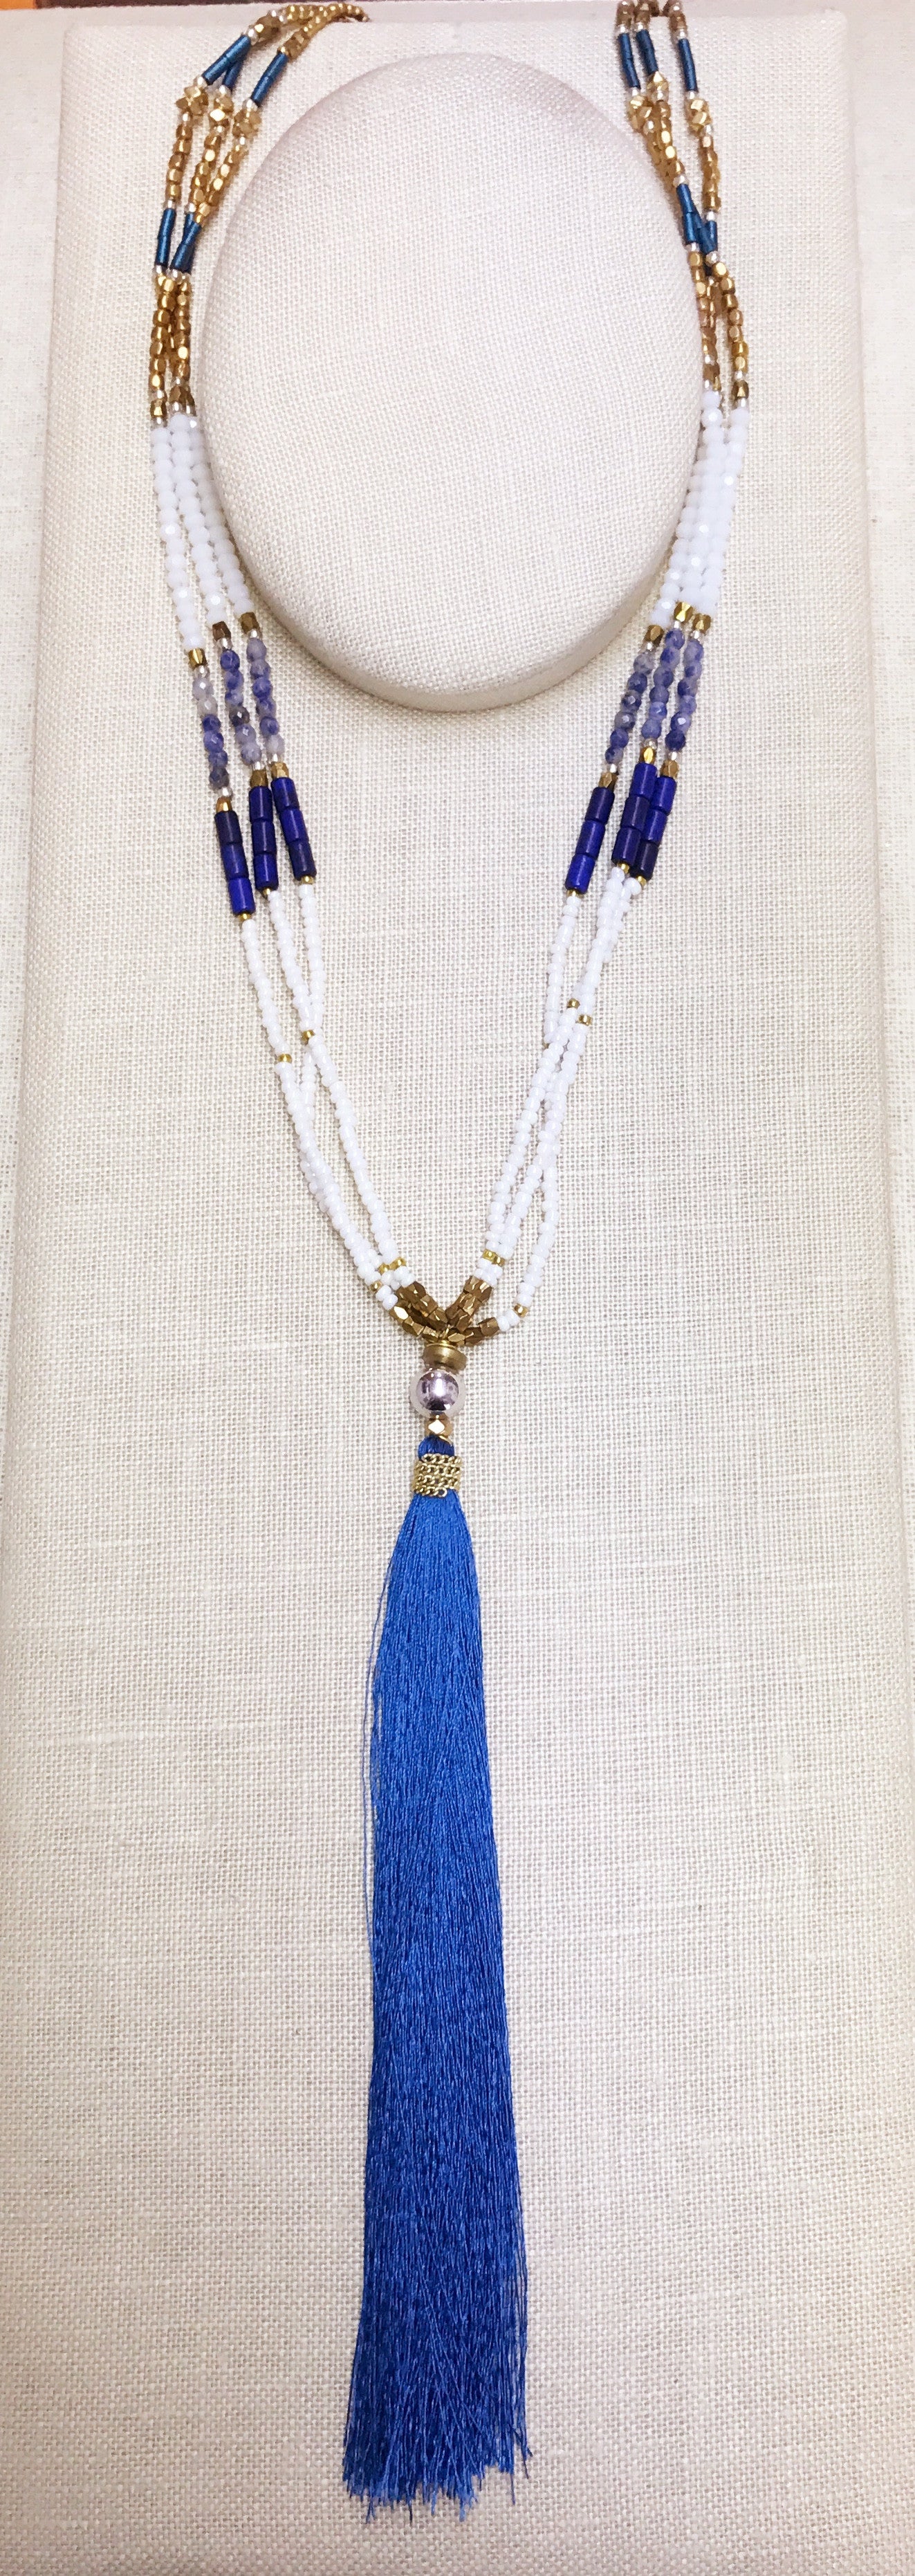 Lapis Mixed Beads Gold Tassel Necklace